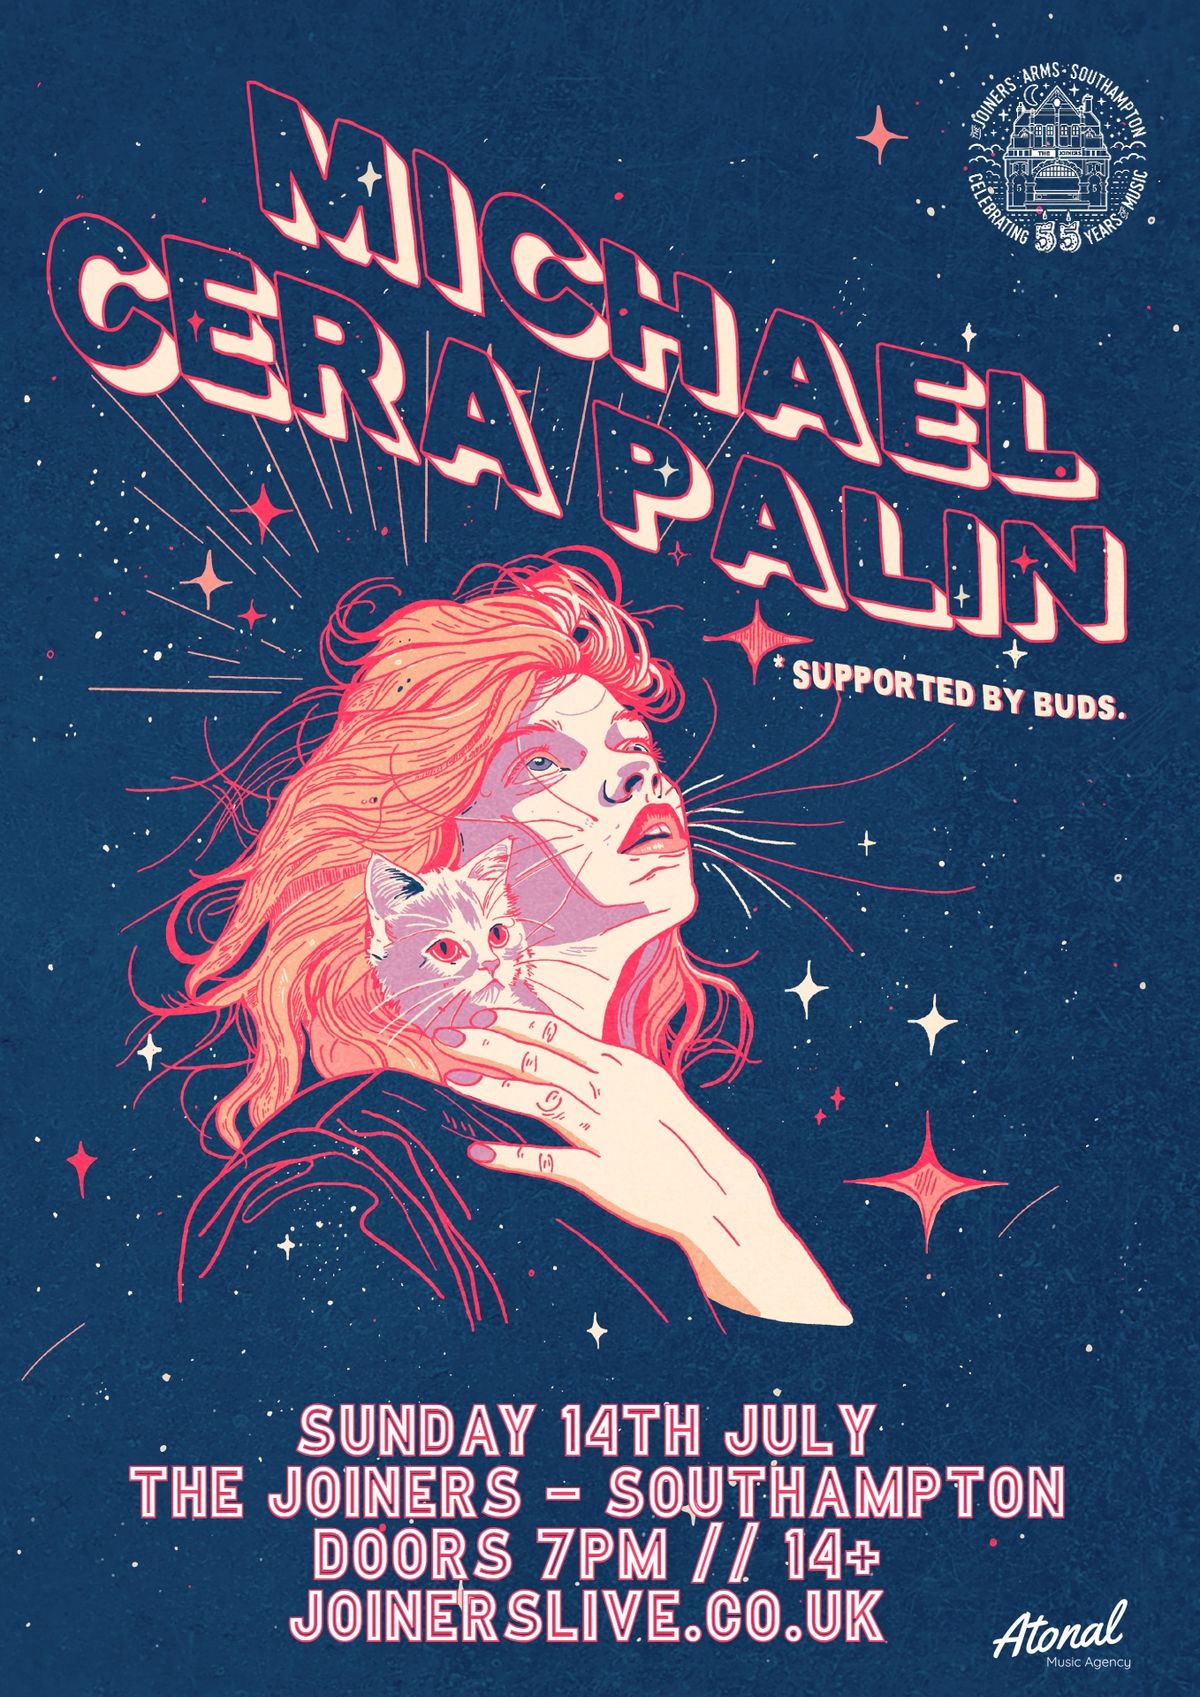 Michael Cera Palin + Buds at The Joiners, Southampton